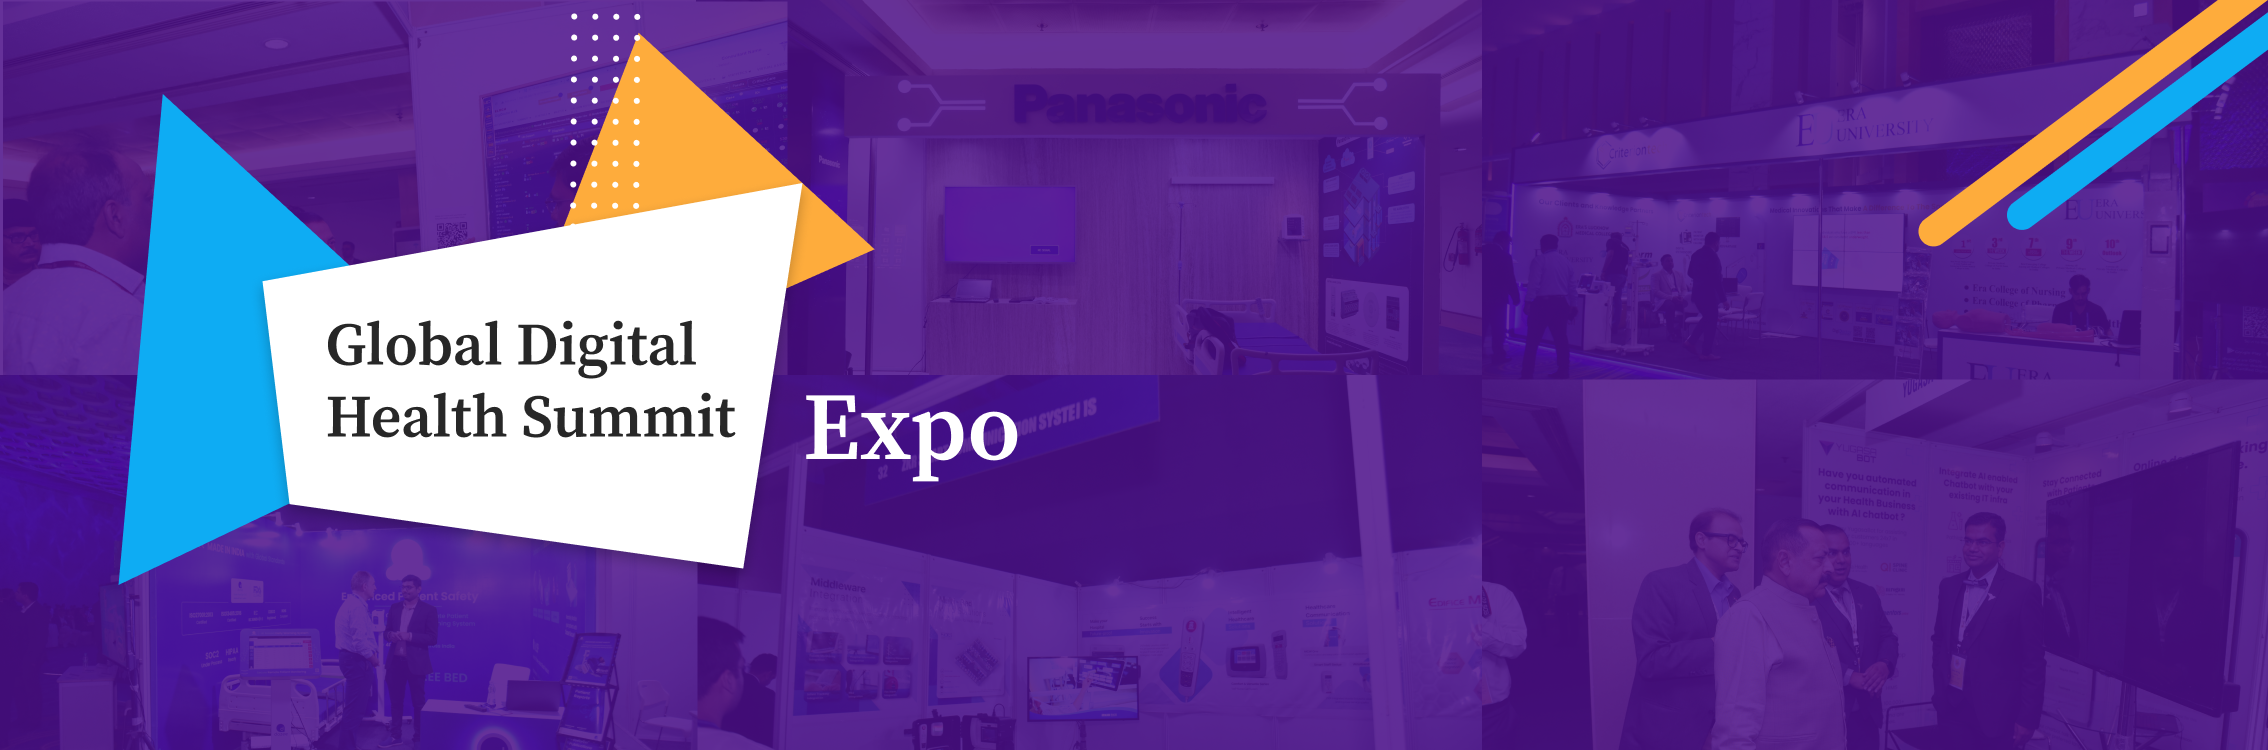 Expo banner